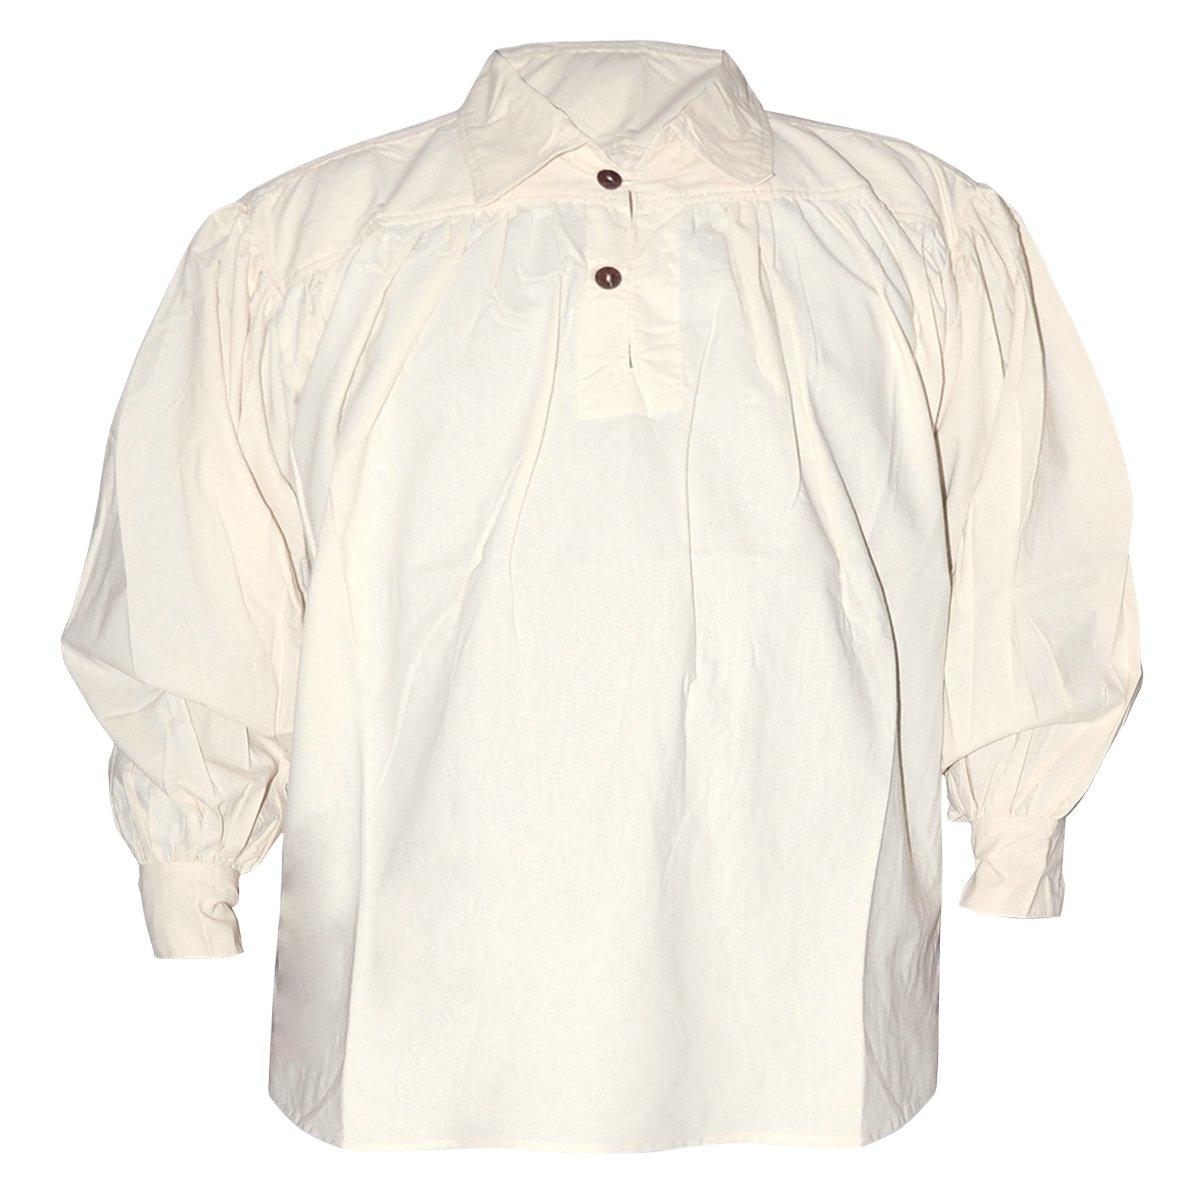 Cotton Shirt, Collared, Button Neck, Natural, Size M